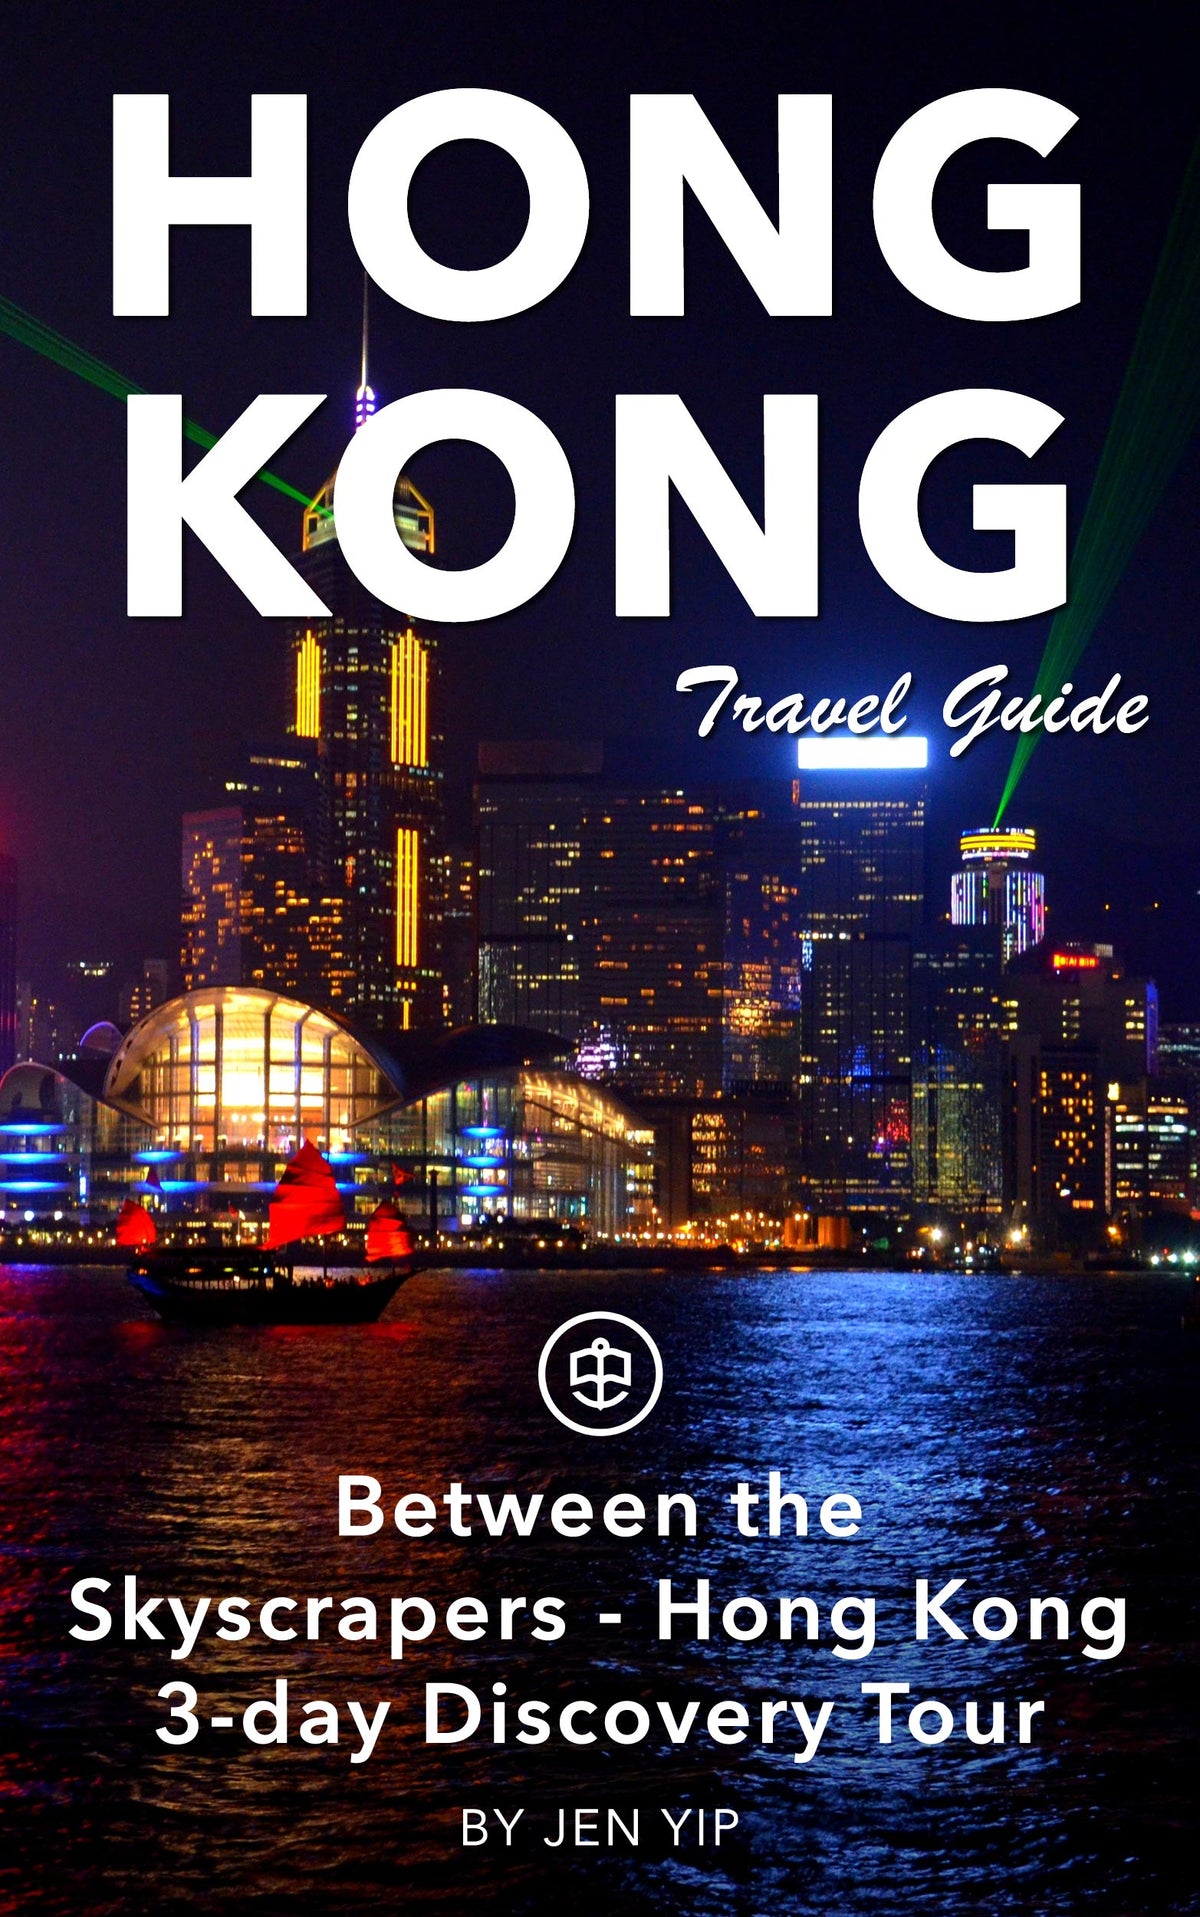 Between the Skyscrapers - Hong Kong 3-Day Discovery Tour